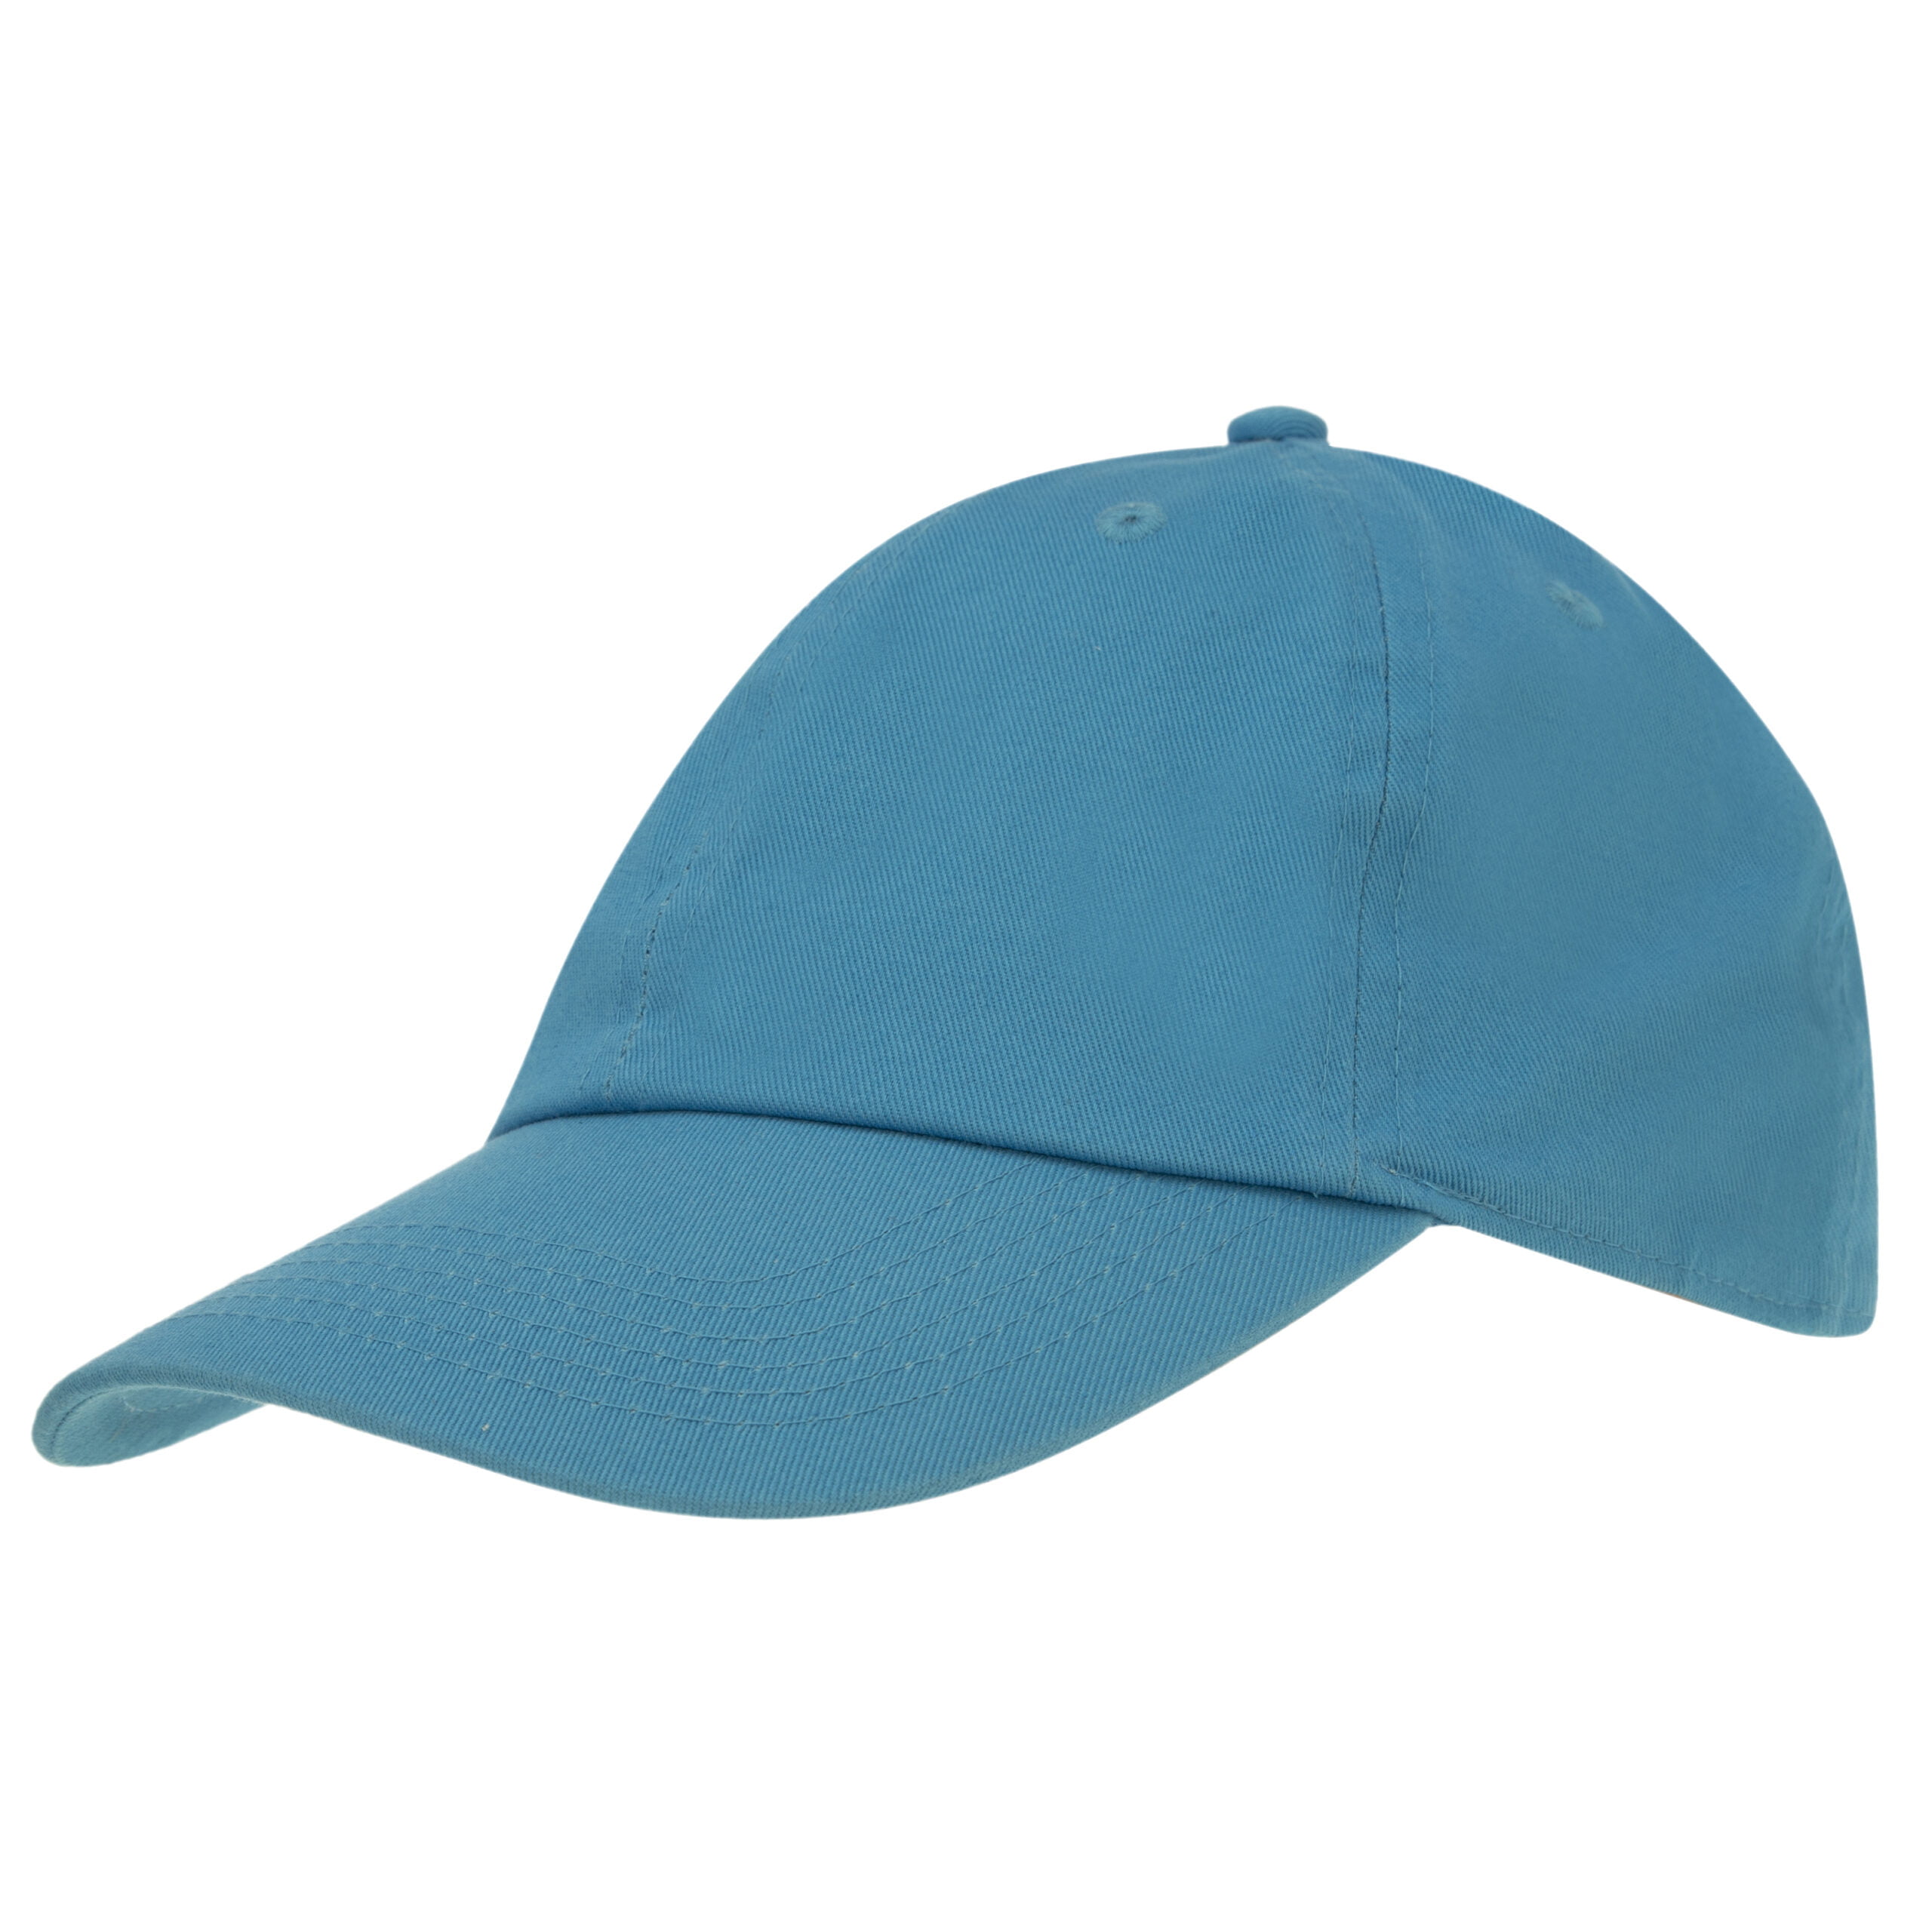 Turquoise Cotton Cap with adjustable Clasp - Single Piece